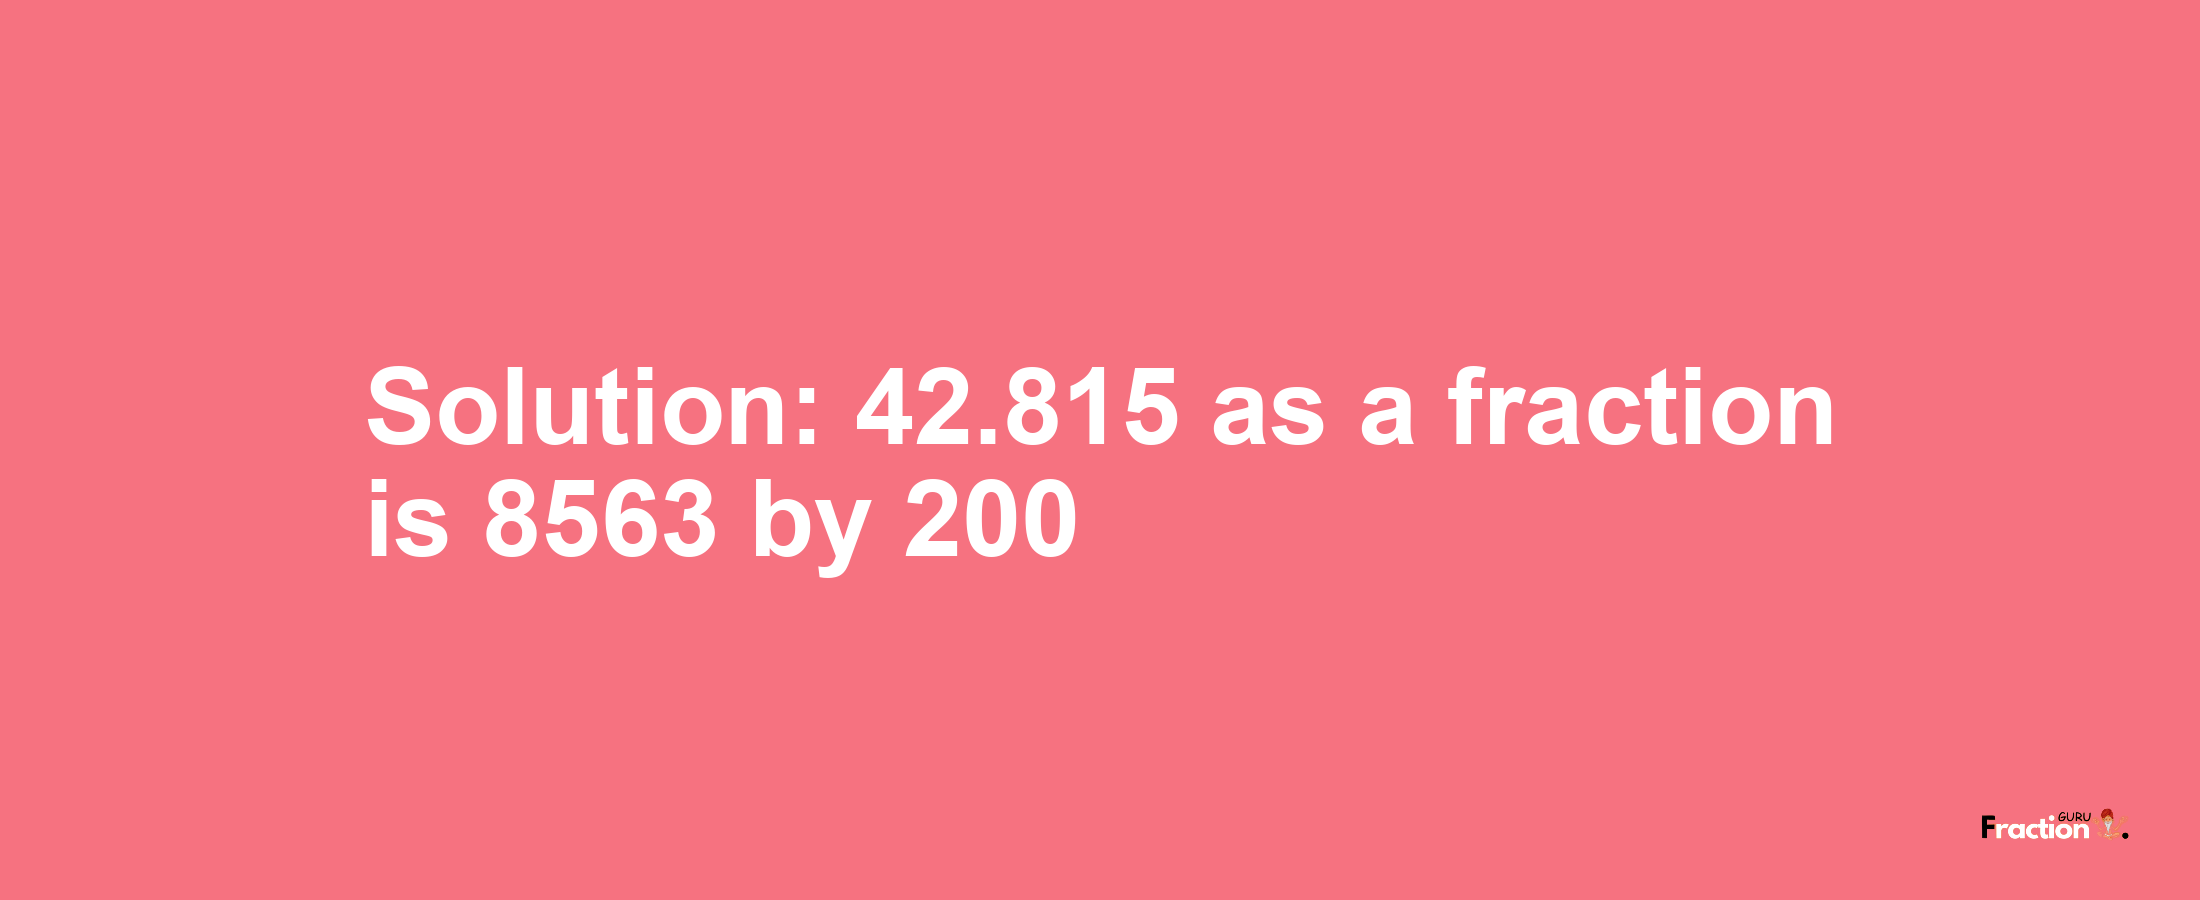 Solution:42.815 as a fraction is 8563/200